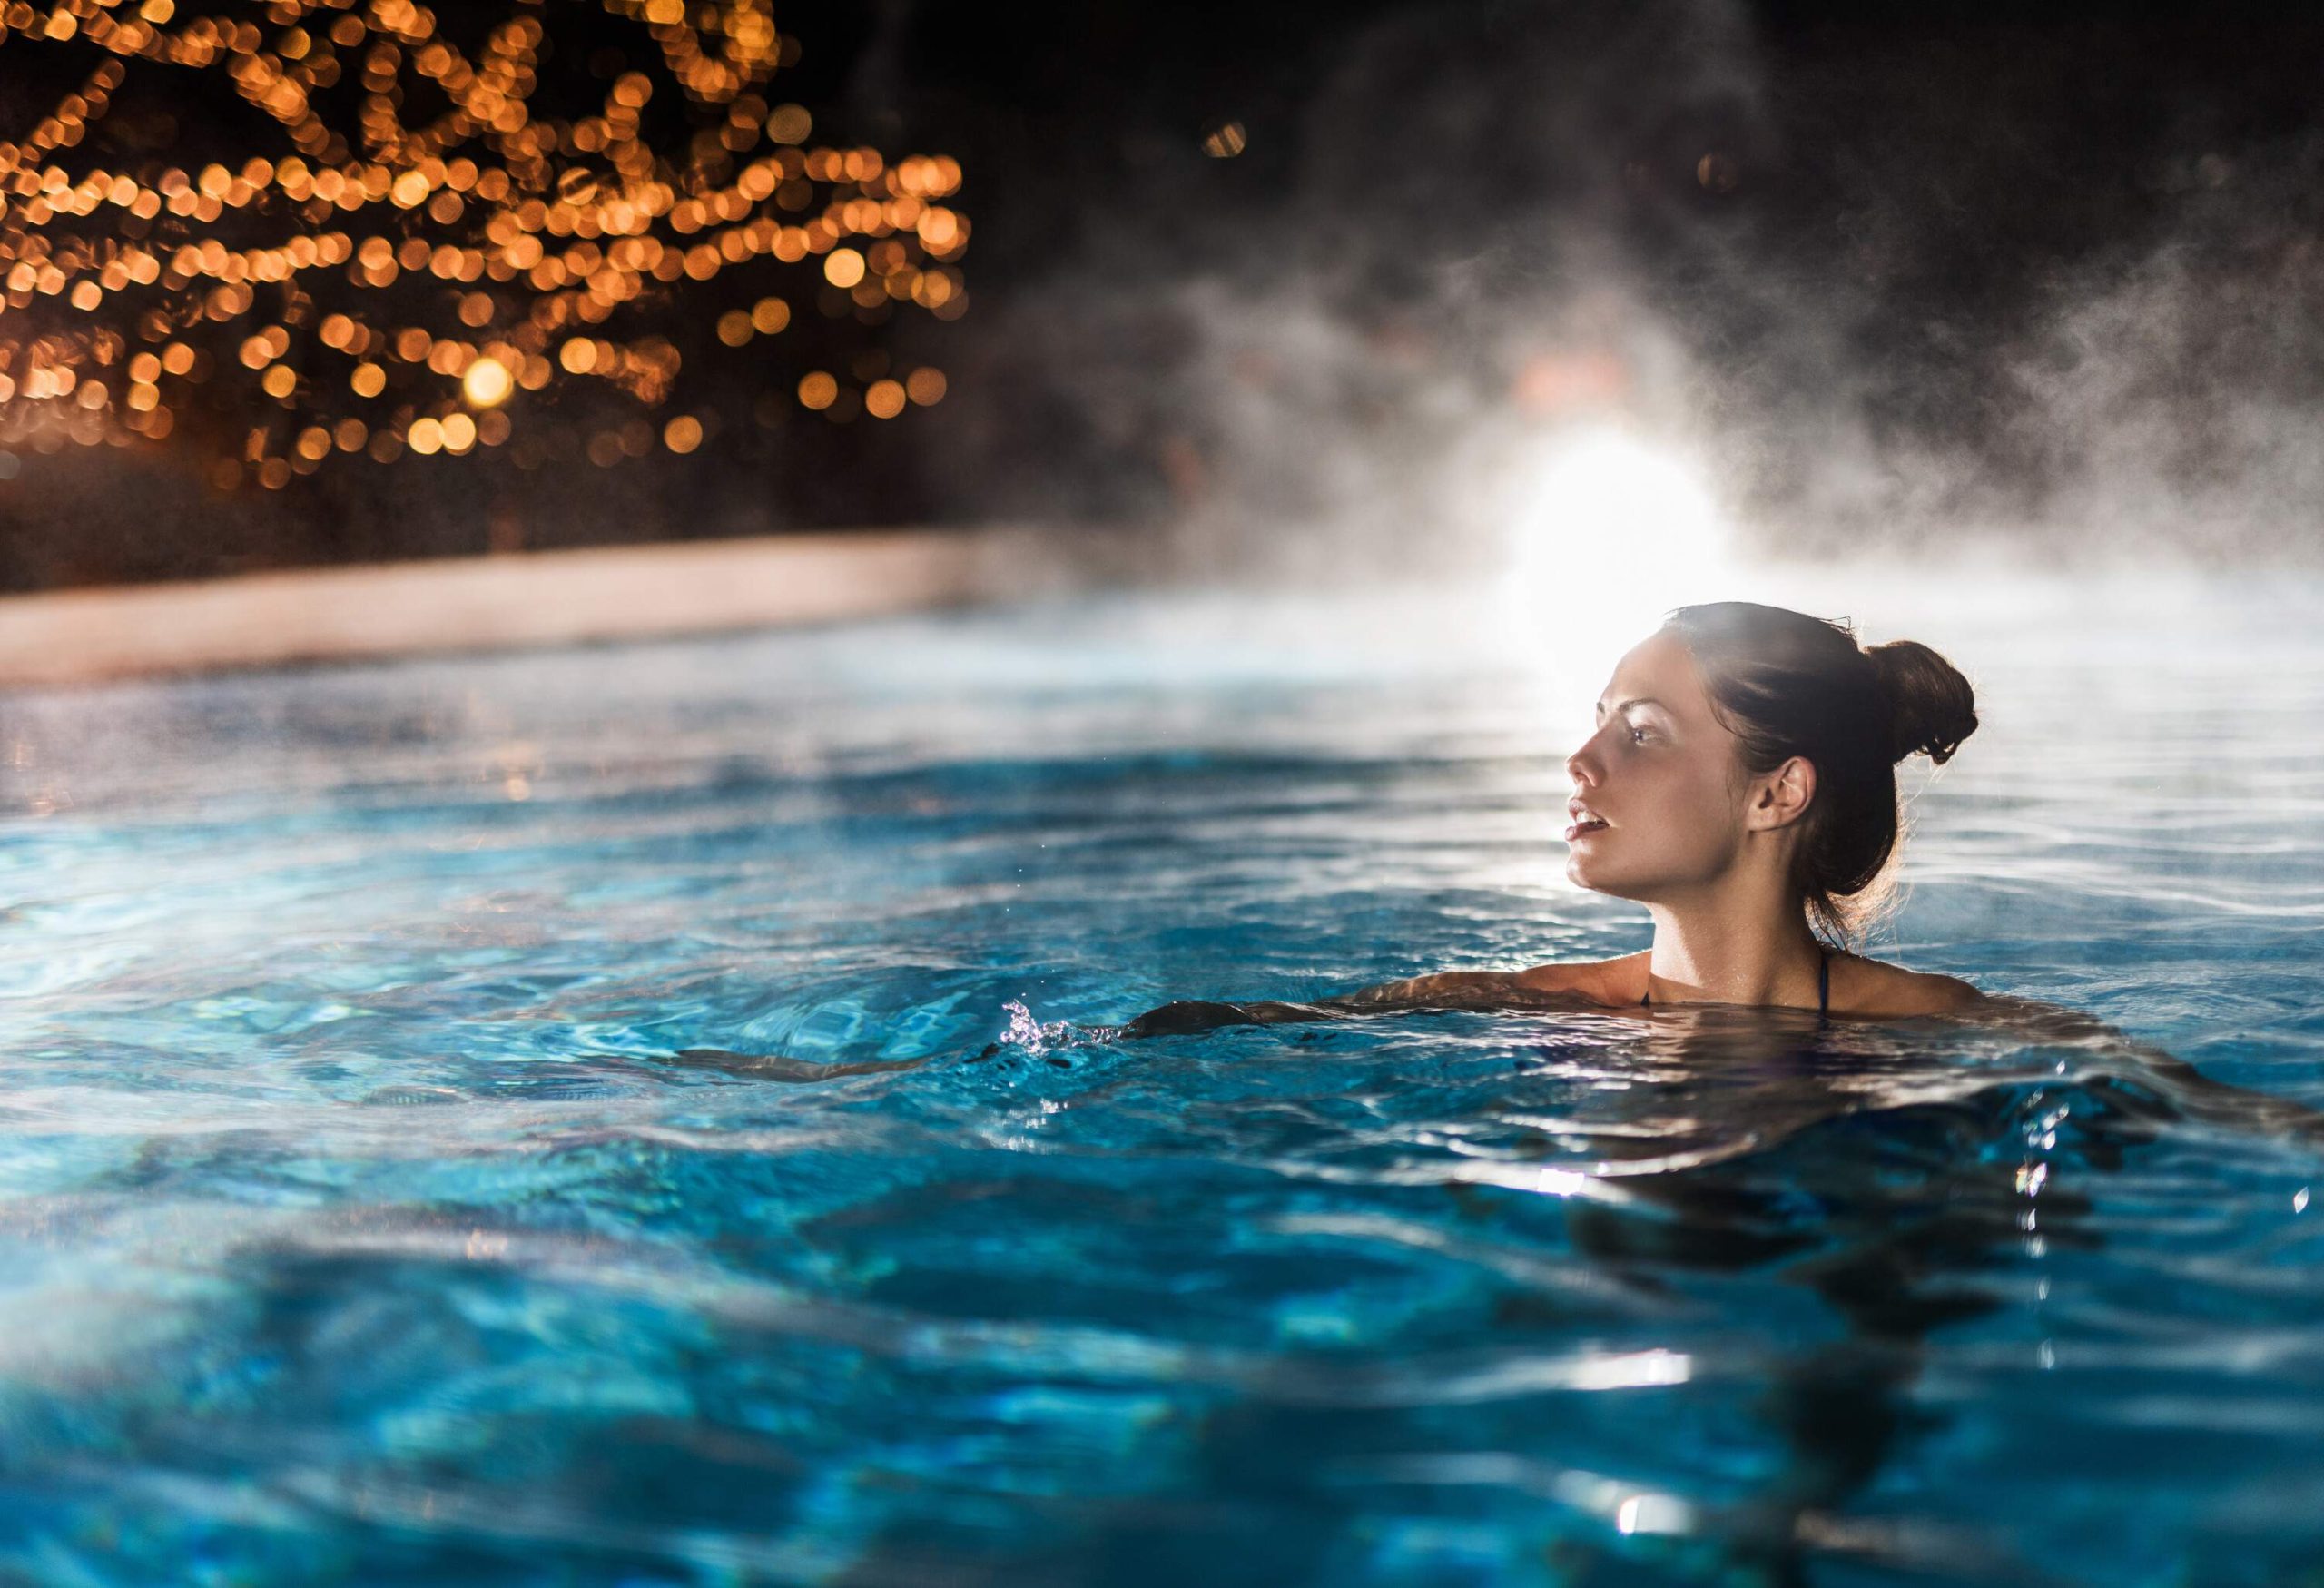 A woman, looking to her right while submerged in a steaming heated swimming pool.